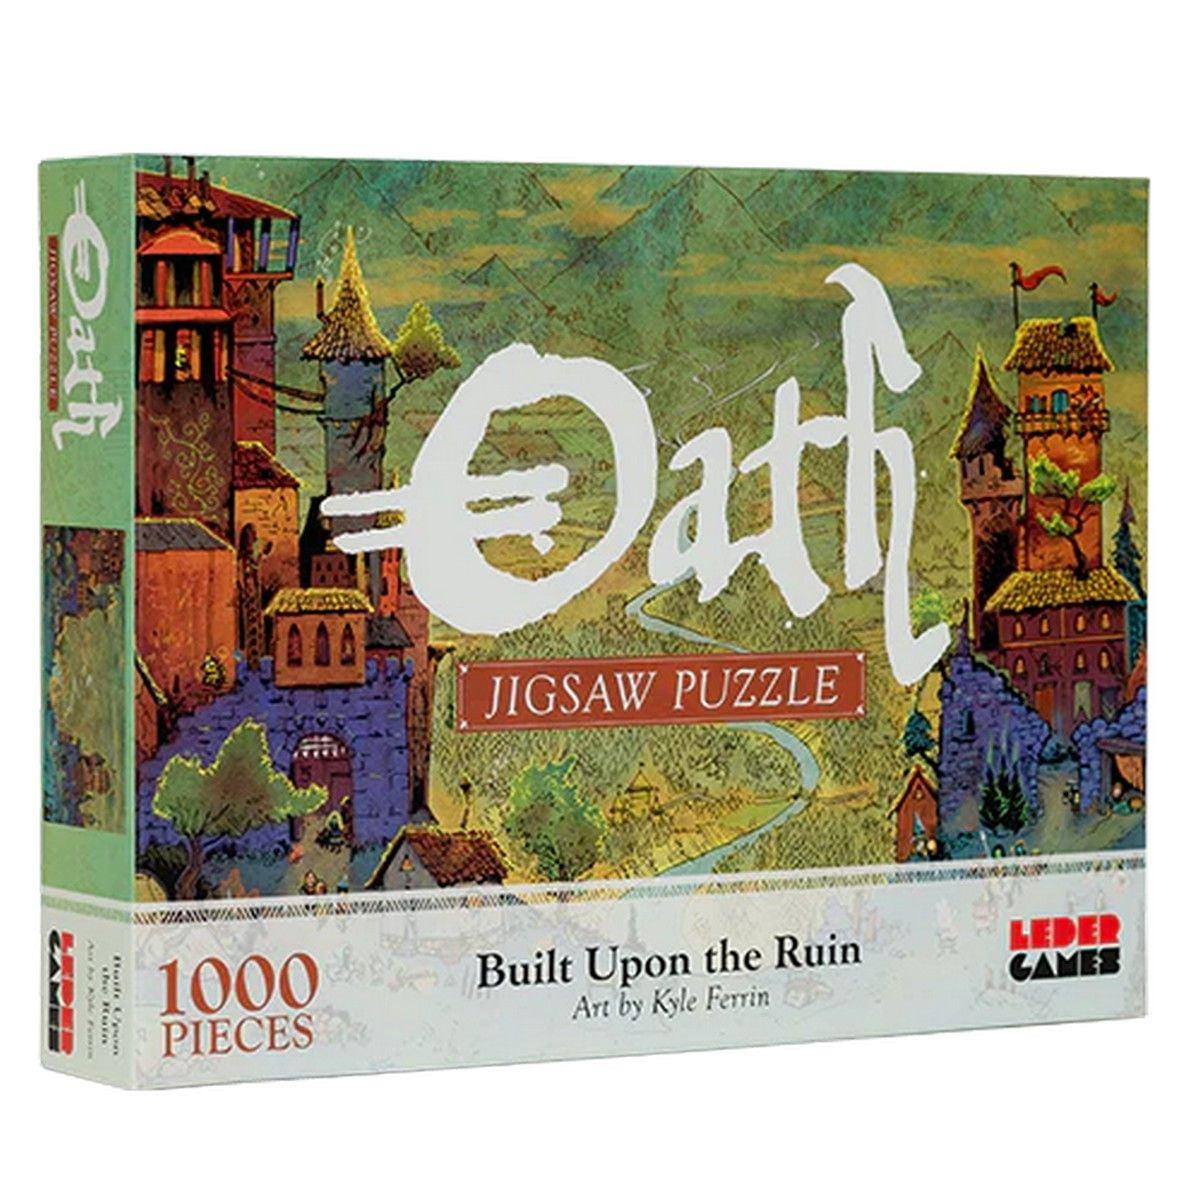 Oath Built Upon the Ruin: Jigsaw Puzzle